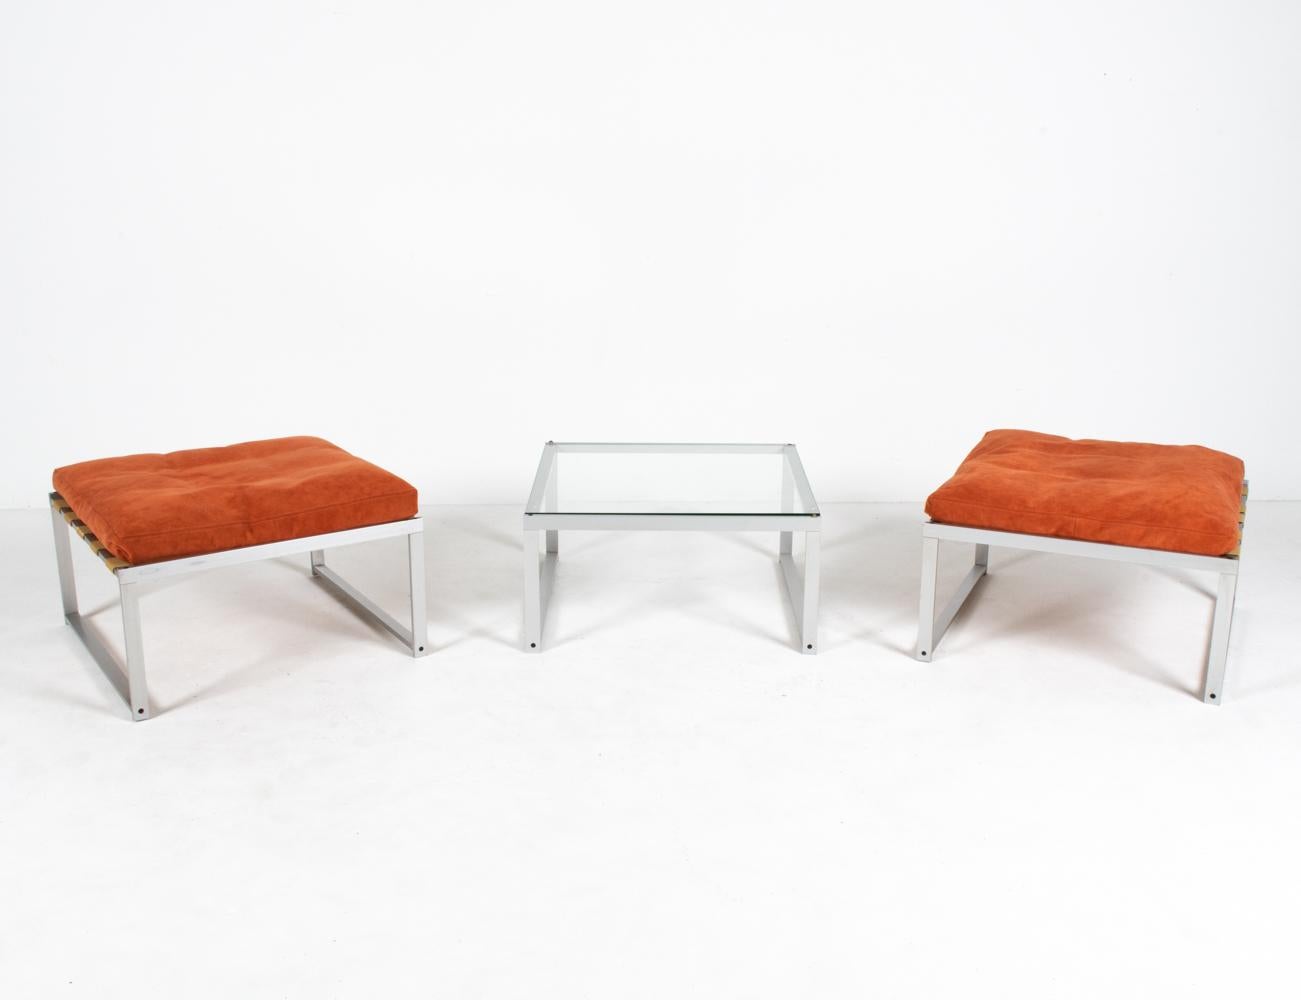 A rare and highly sought-after example of early Minimalism, this fabulous seating suite from the VI 108 series was designed by Jørgen Høj and crafted by Niels Vitsøe from flat bars of high-grade brushed aluminum, making it both sturdy and